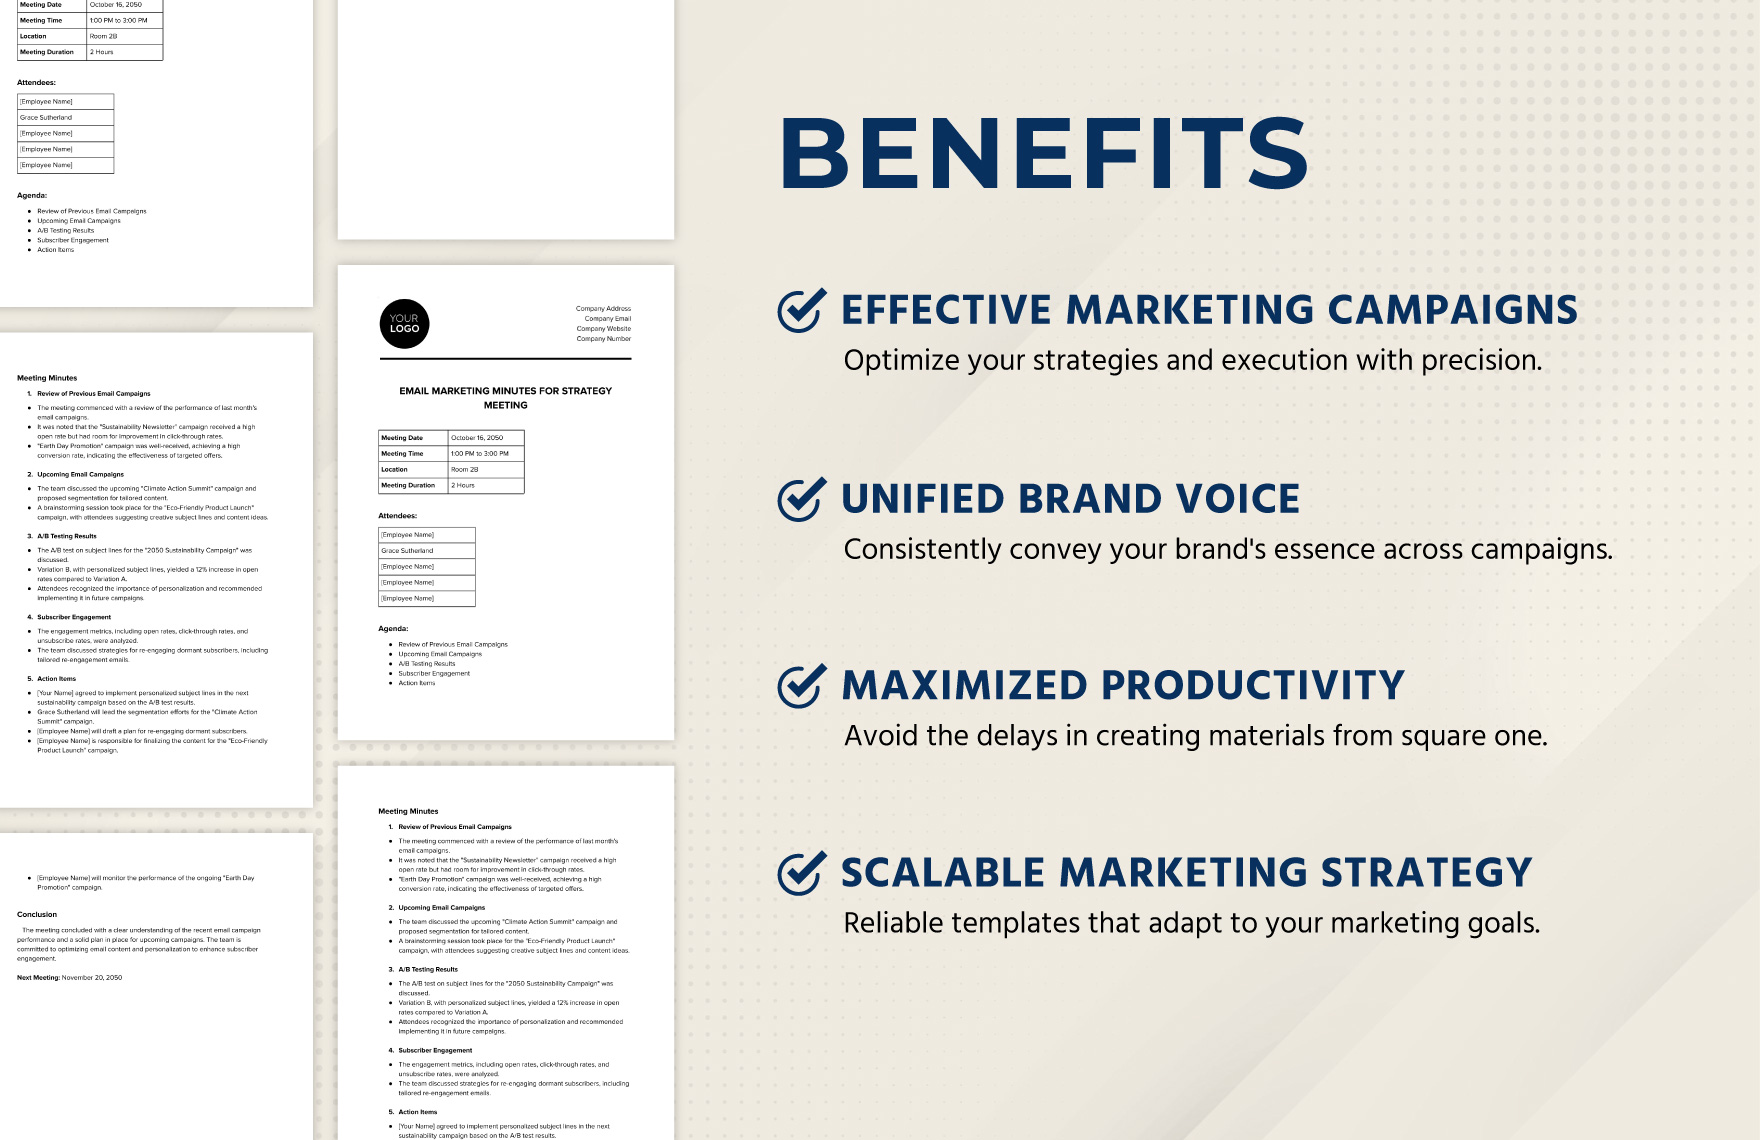 Email Marketing Minutes for Strategy Meeting Template